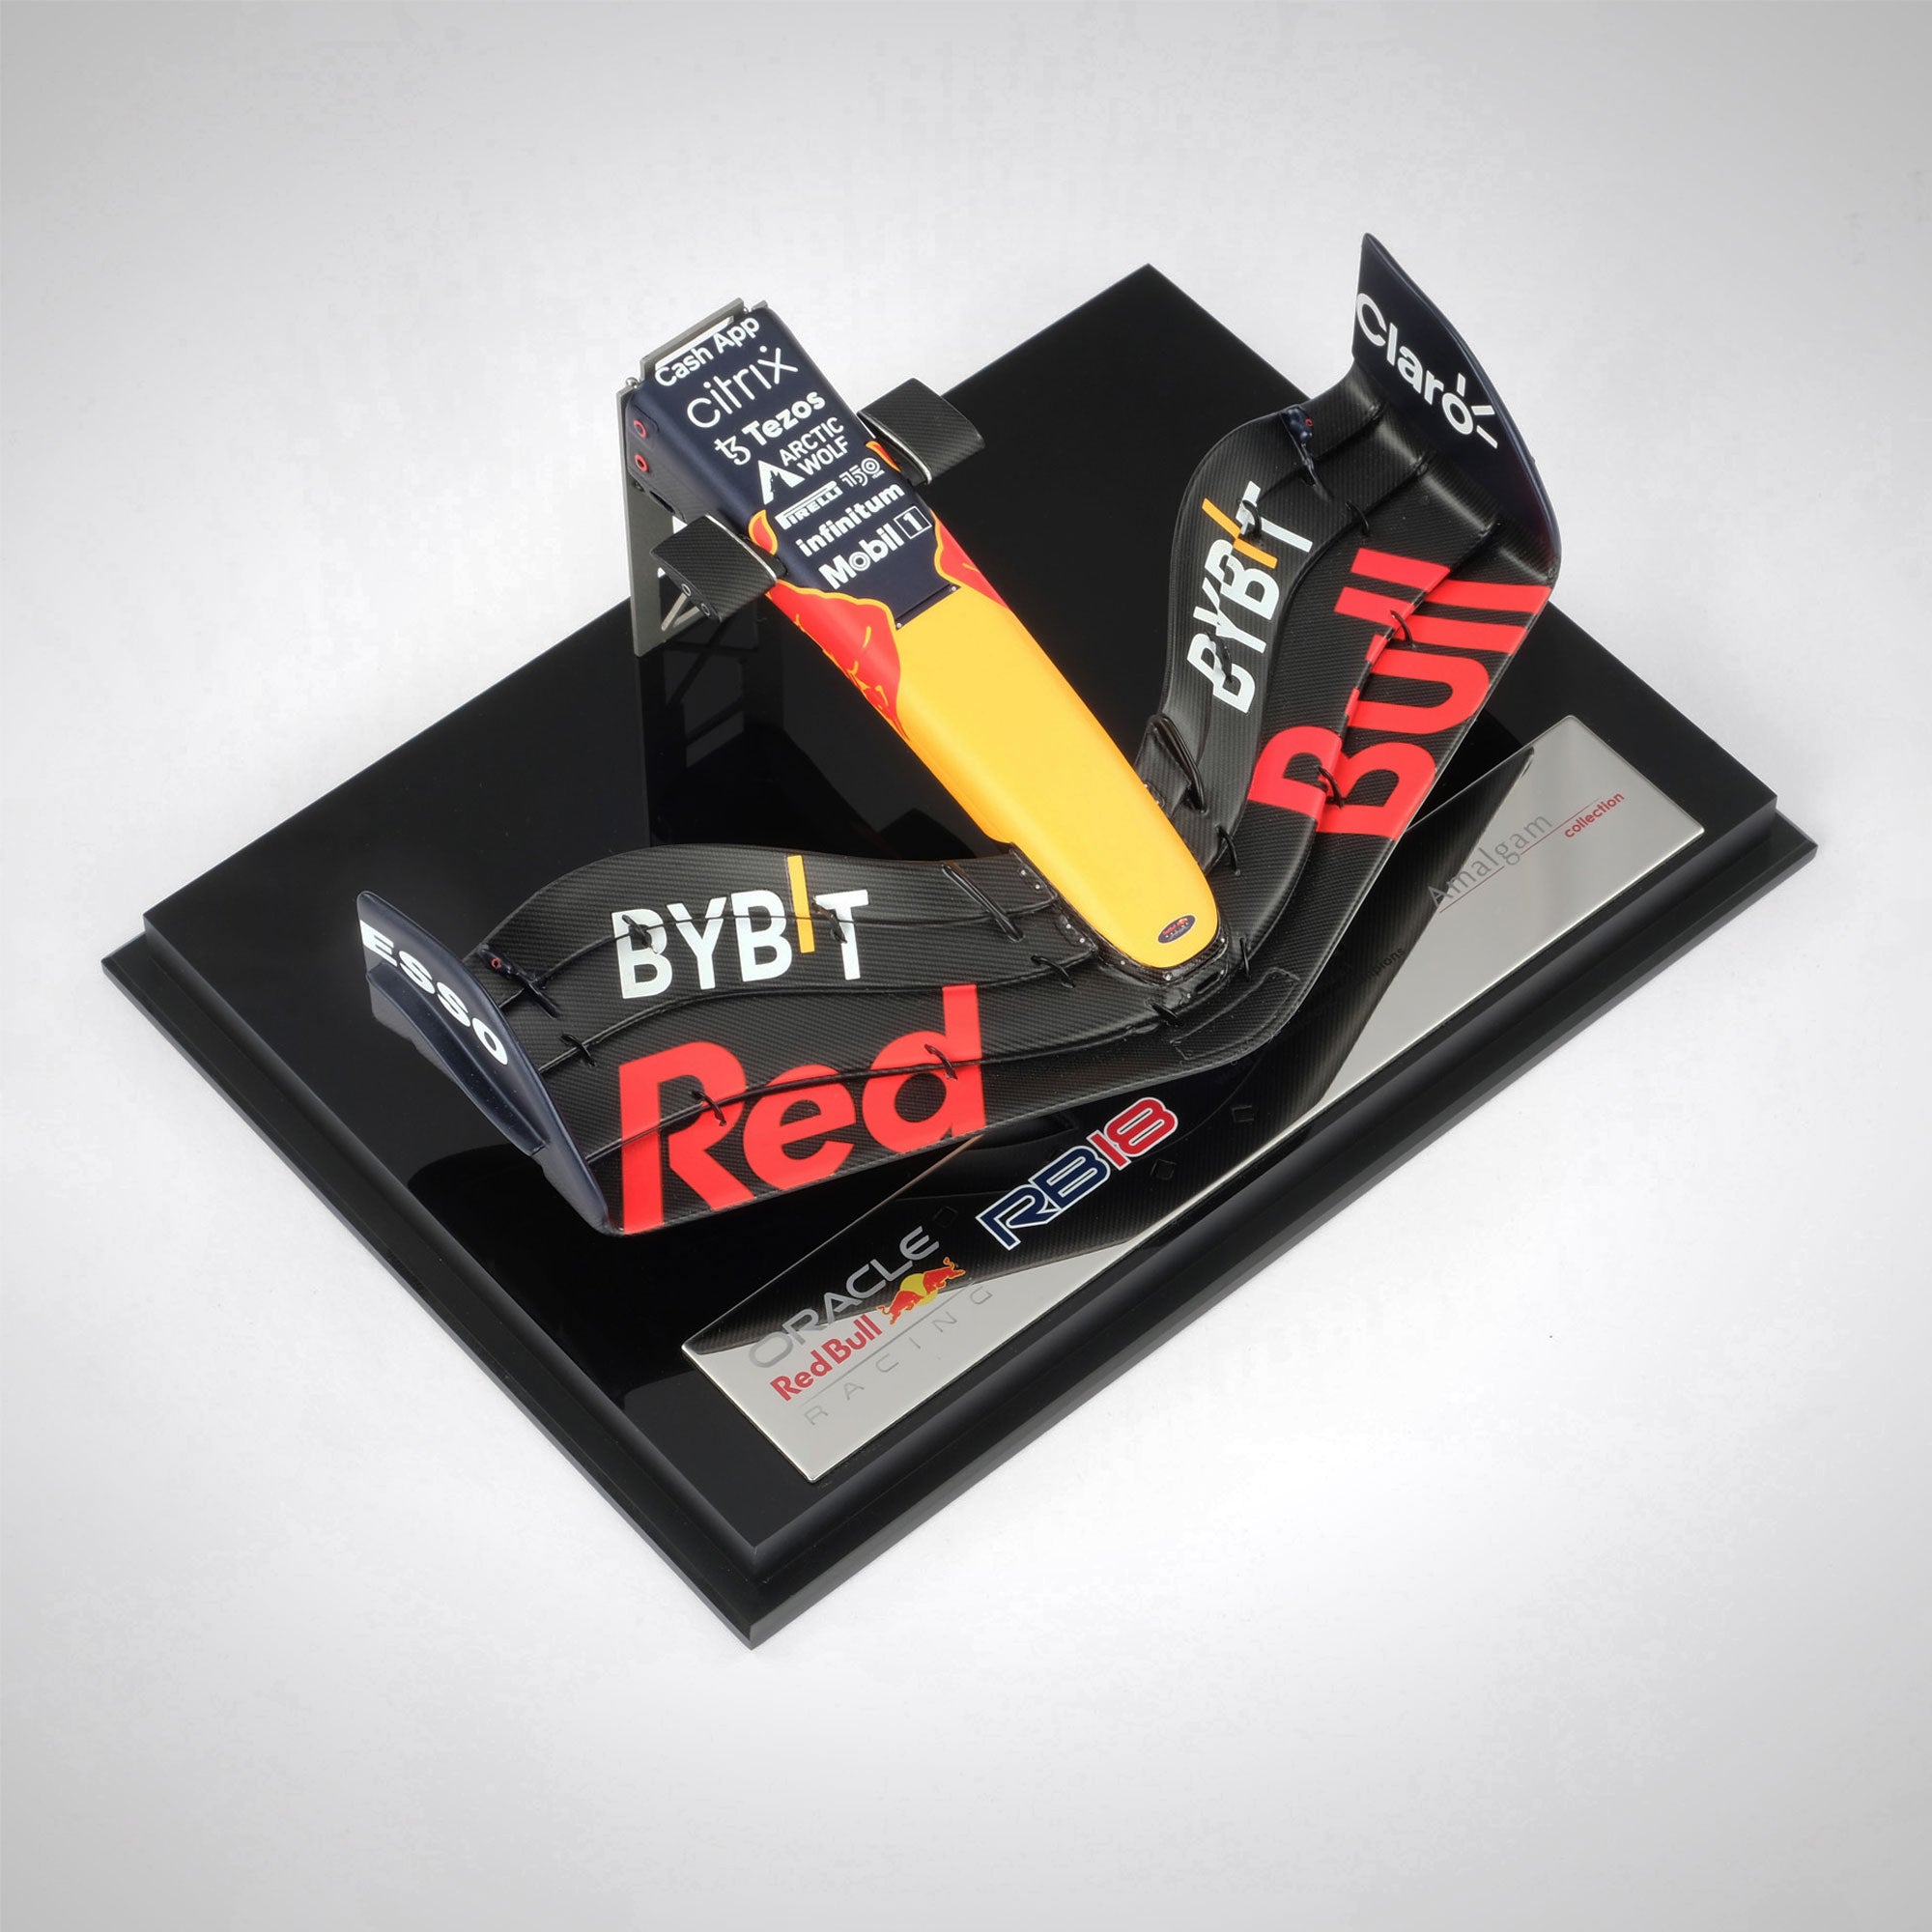 Oracle Red Bull Racing 2022 RB18 1:12 Scale Model Nosecone